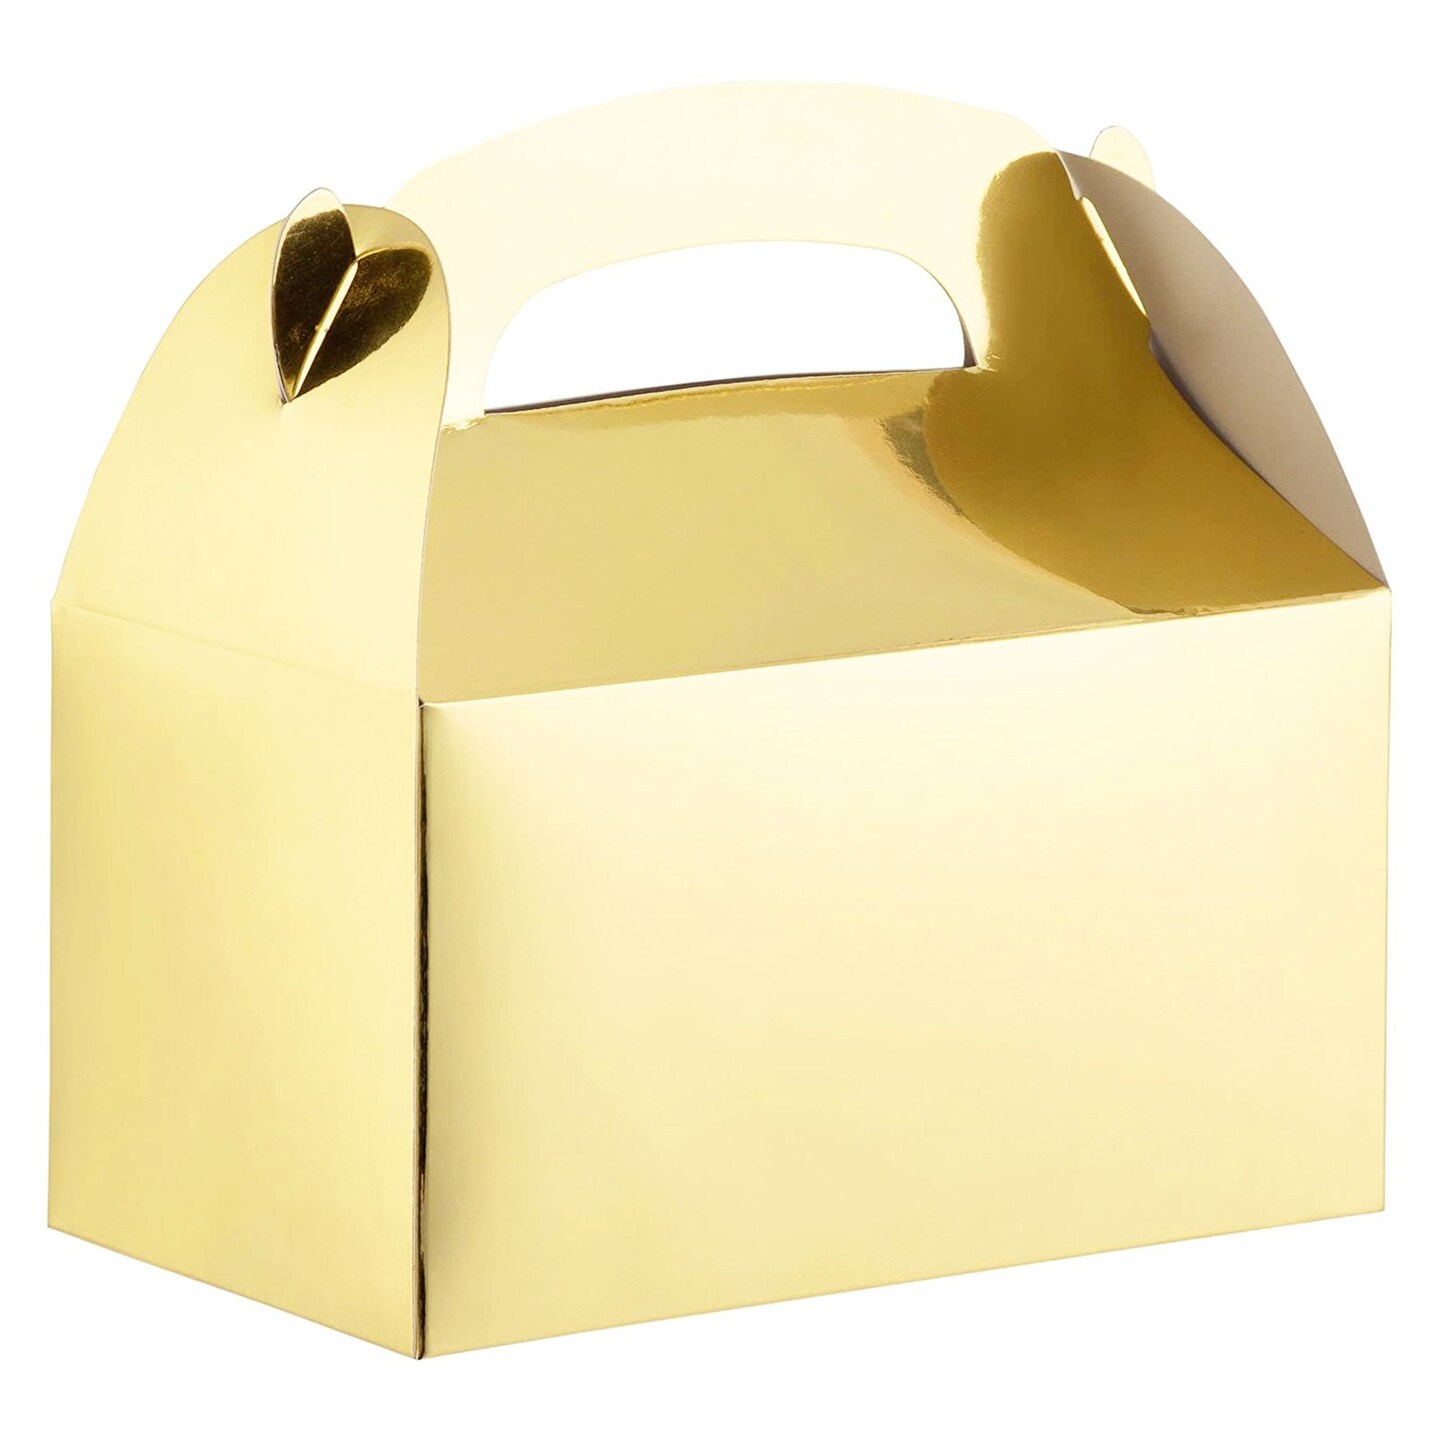 24-Pack Treat Boxes - Candy Gable Boxes for Party Favors, Birthday, Wedding, Baby Shower (Gold, 6.2x3.5x3.6 In)